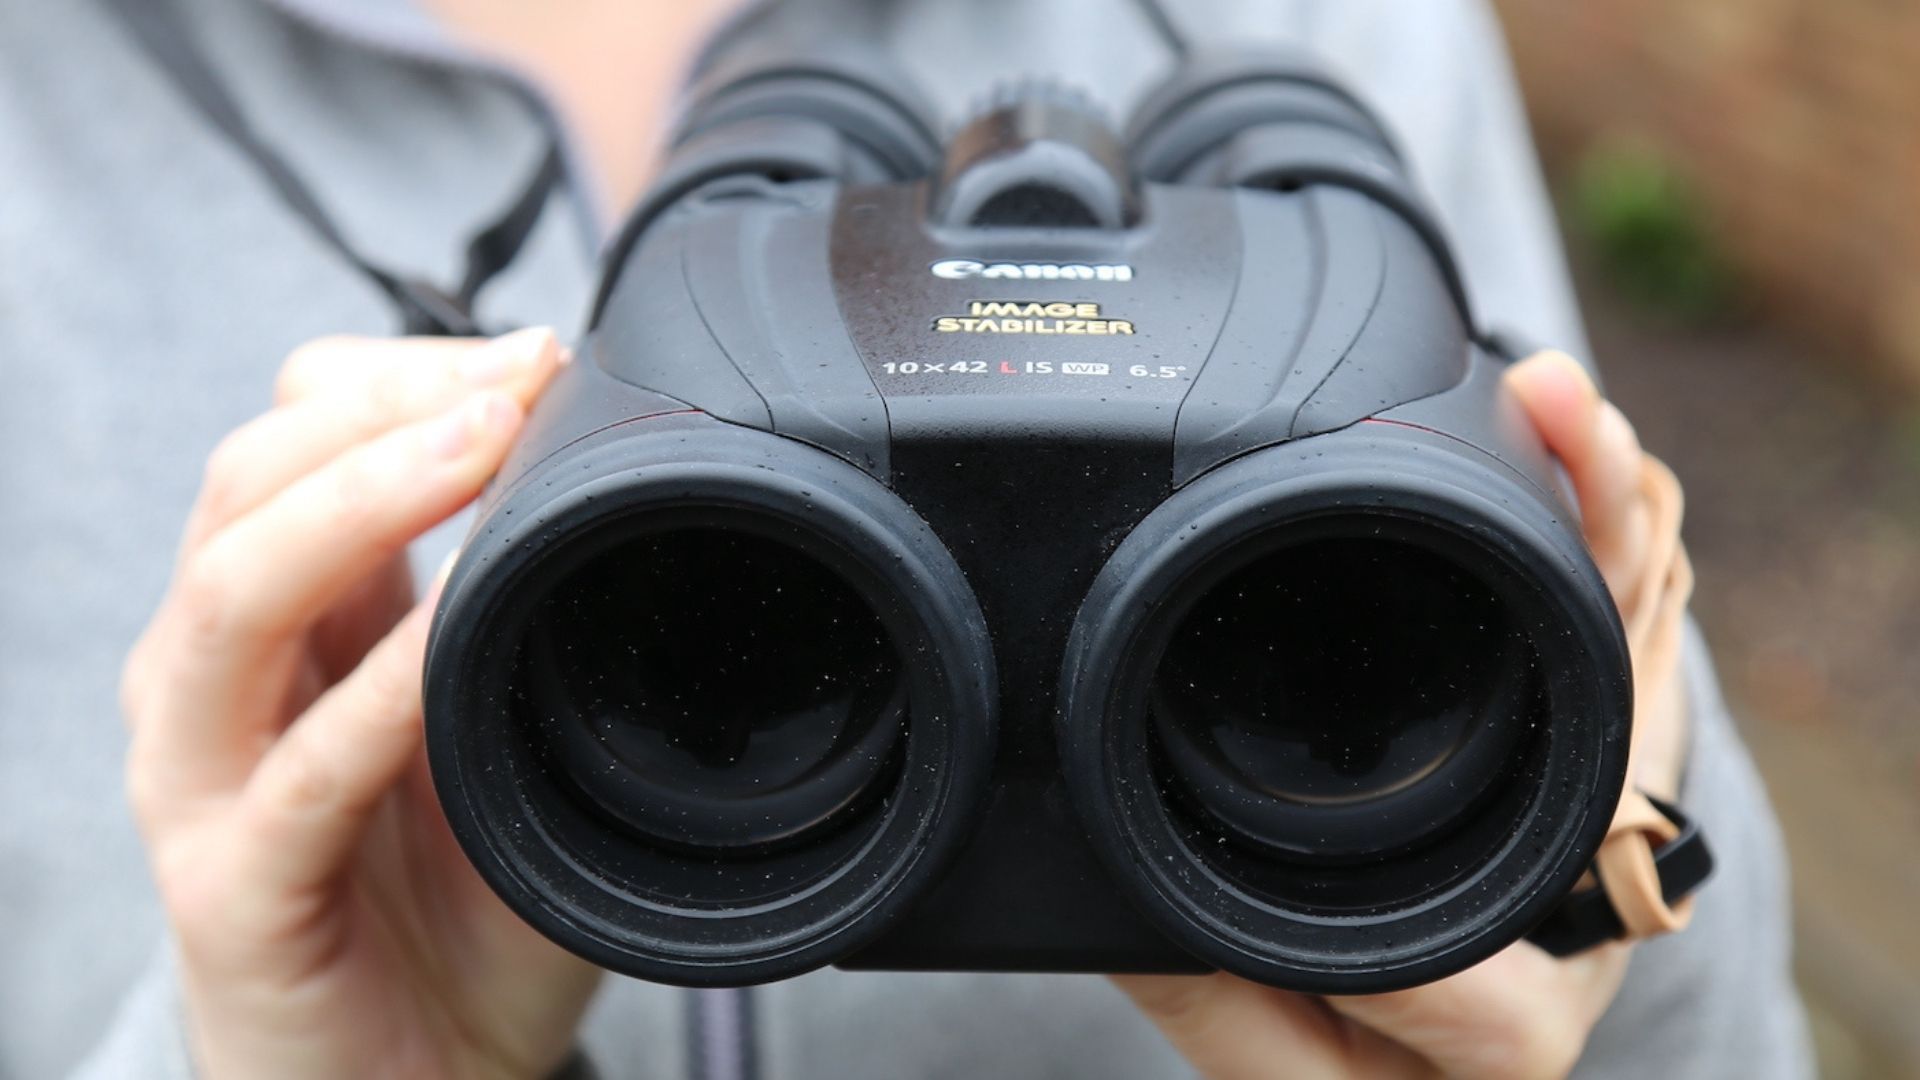 Canon 10x42L IS WP binoculars review: unique and unsurpassed image